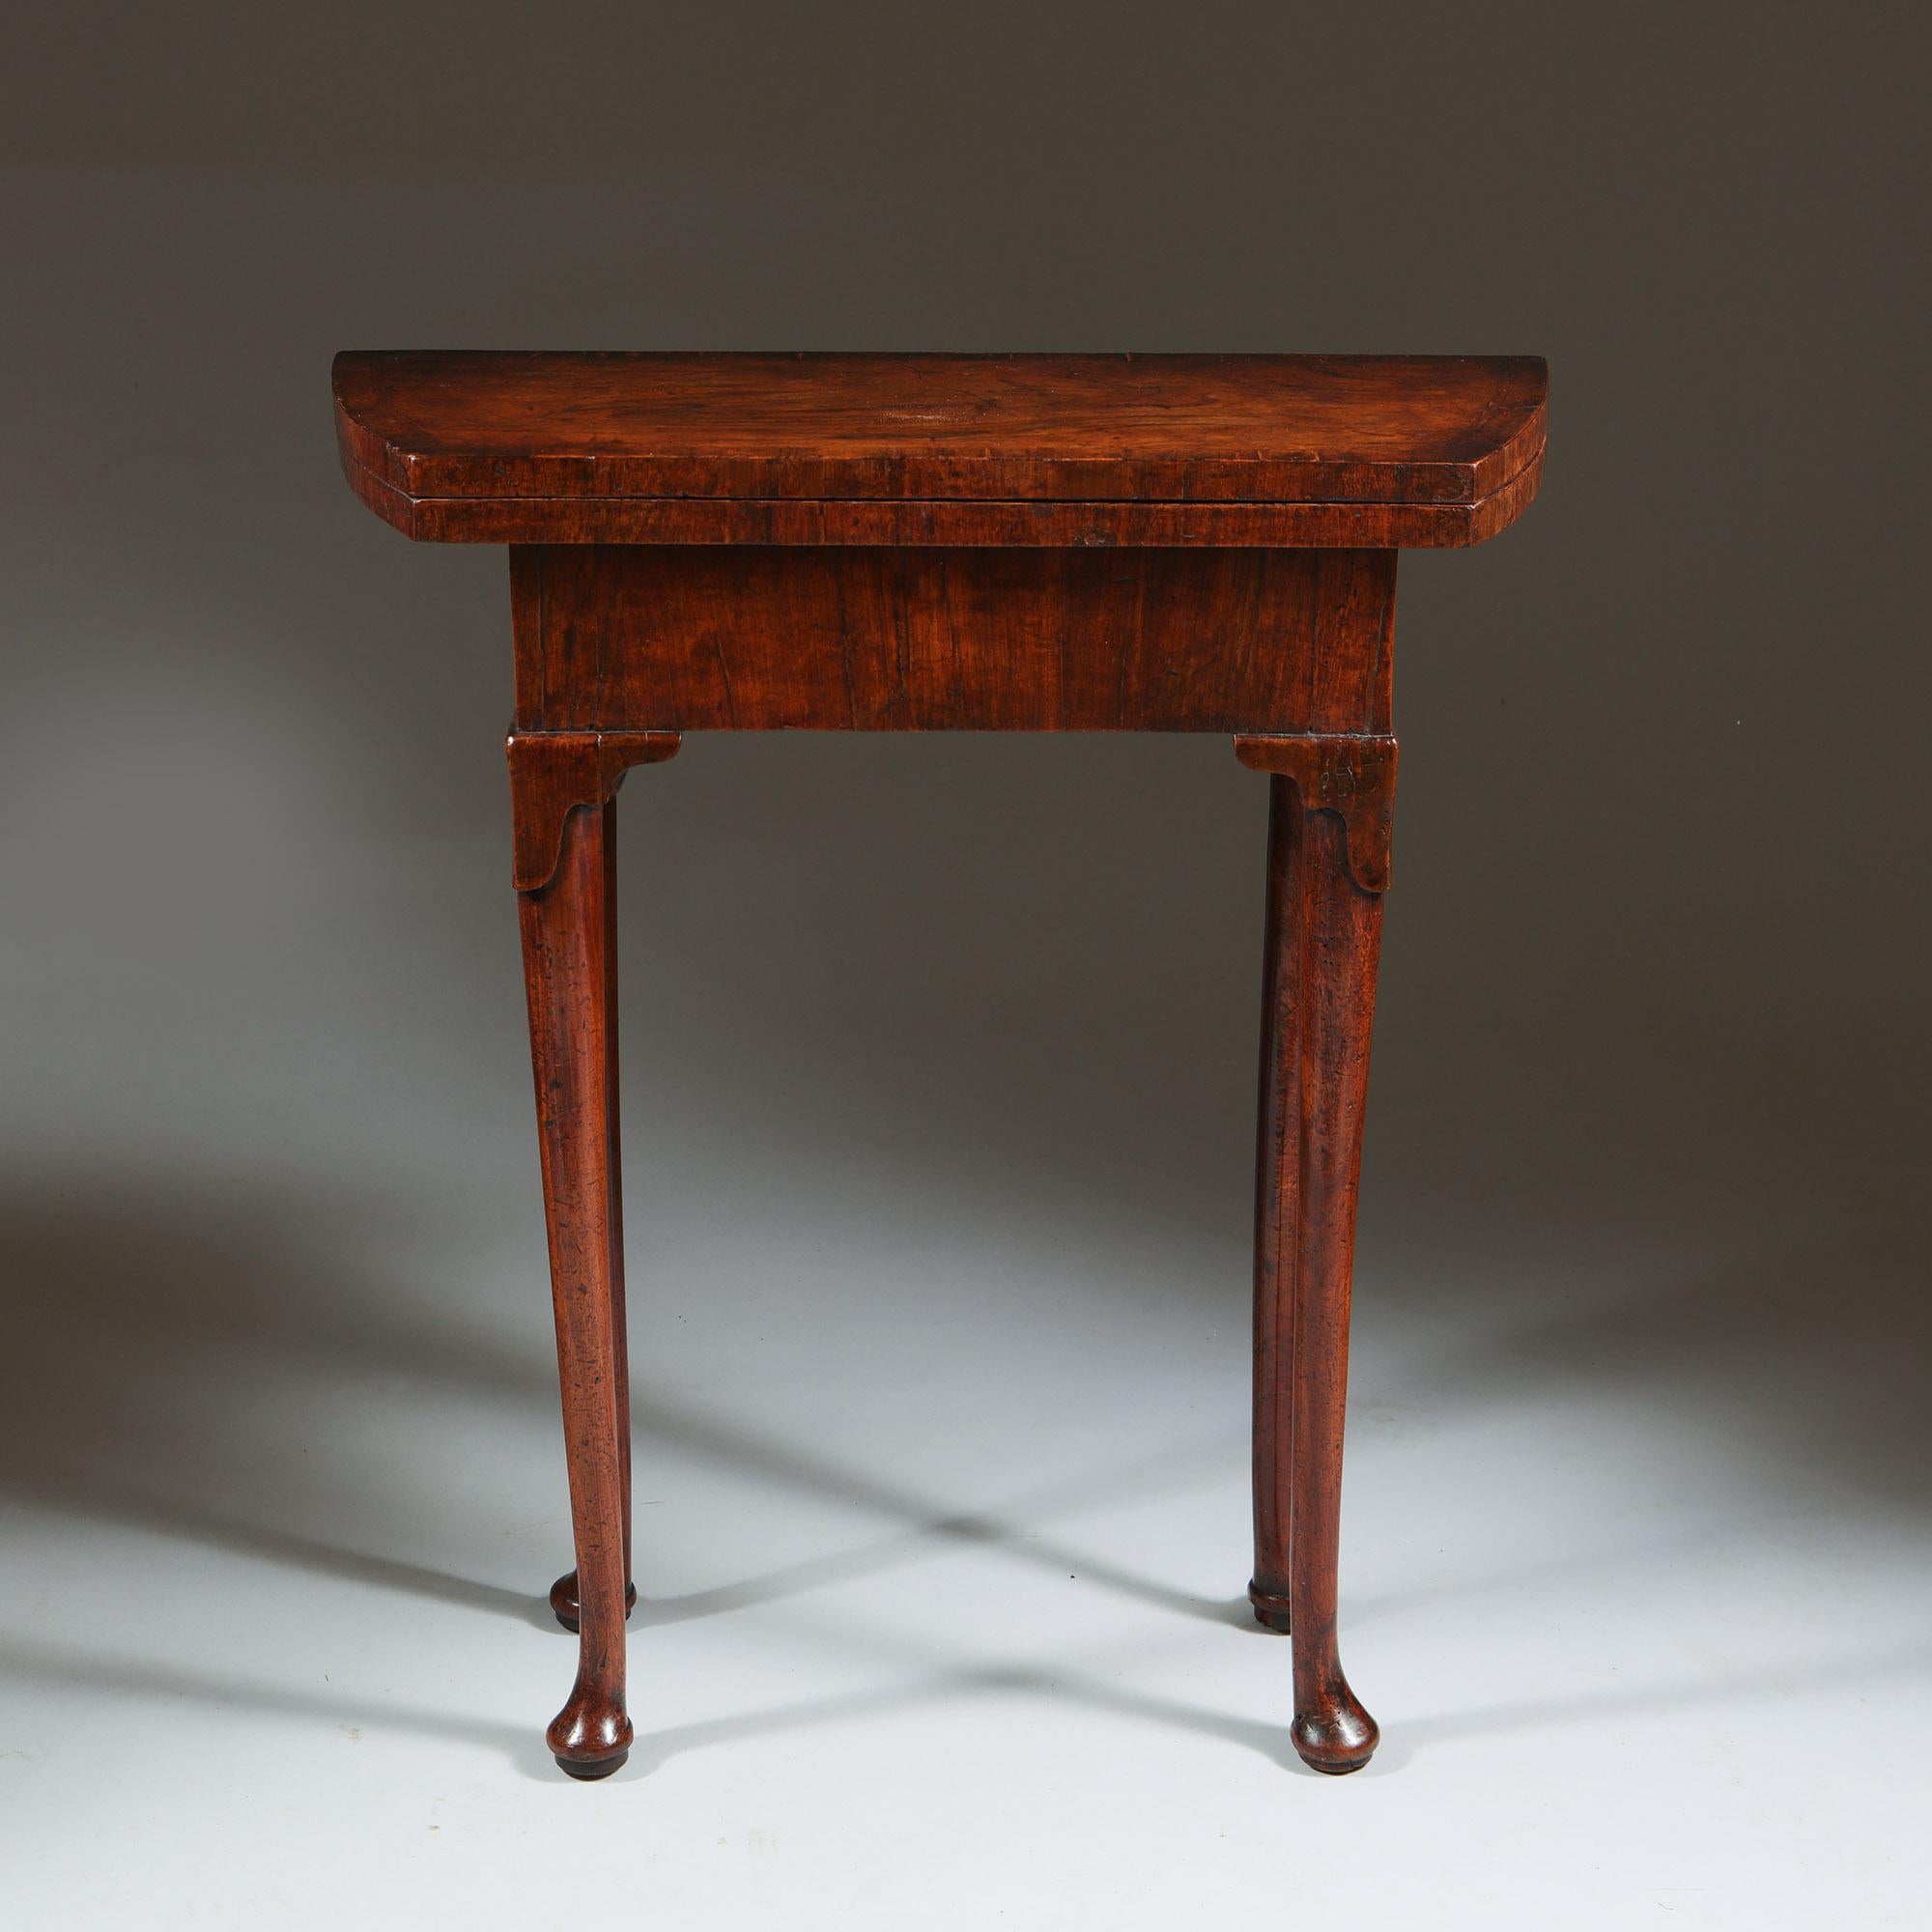 A Unique Early 18th Century Diminutive George I Figured Walnut Bachelors Table, Circa 1720-1730

The table is of very rare diminutive proportions raised on slender straight legs with what is known as lappet carved knees, terminating on pad feet. The